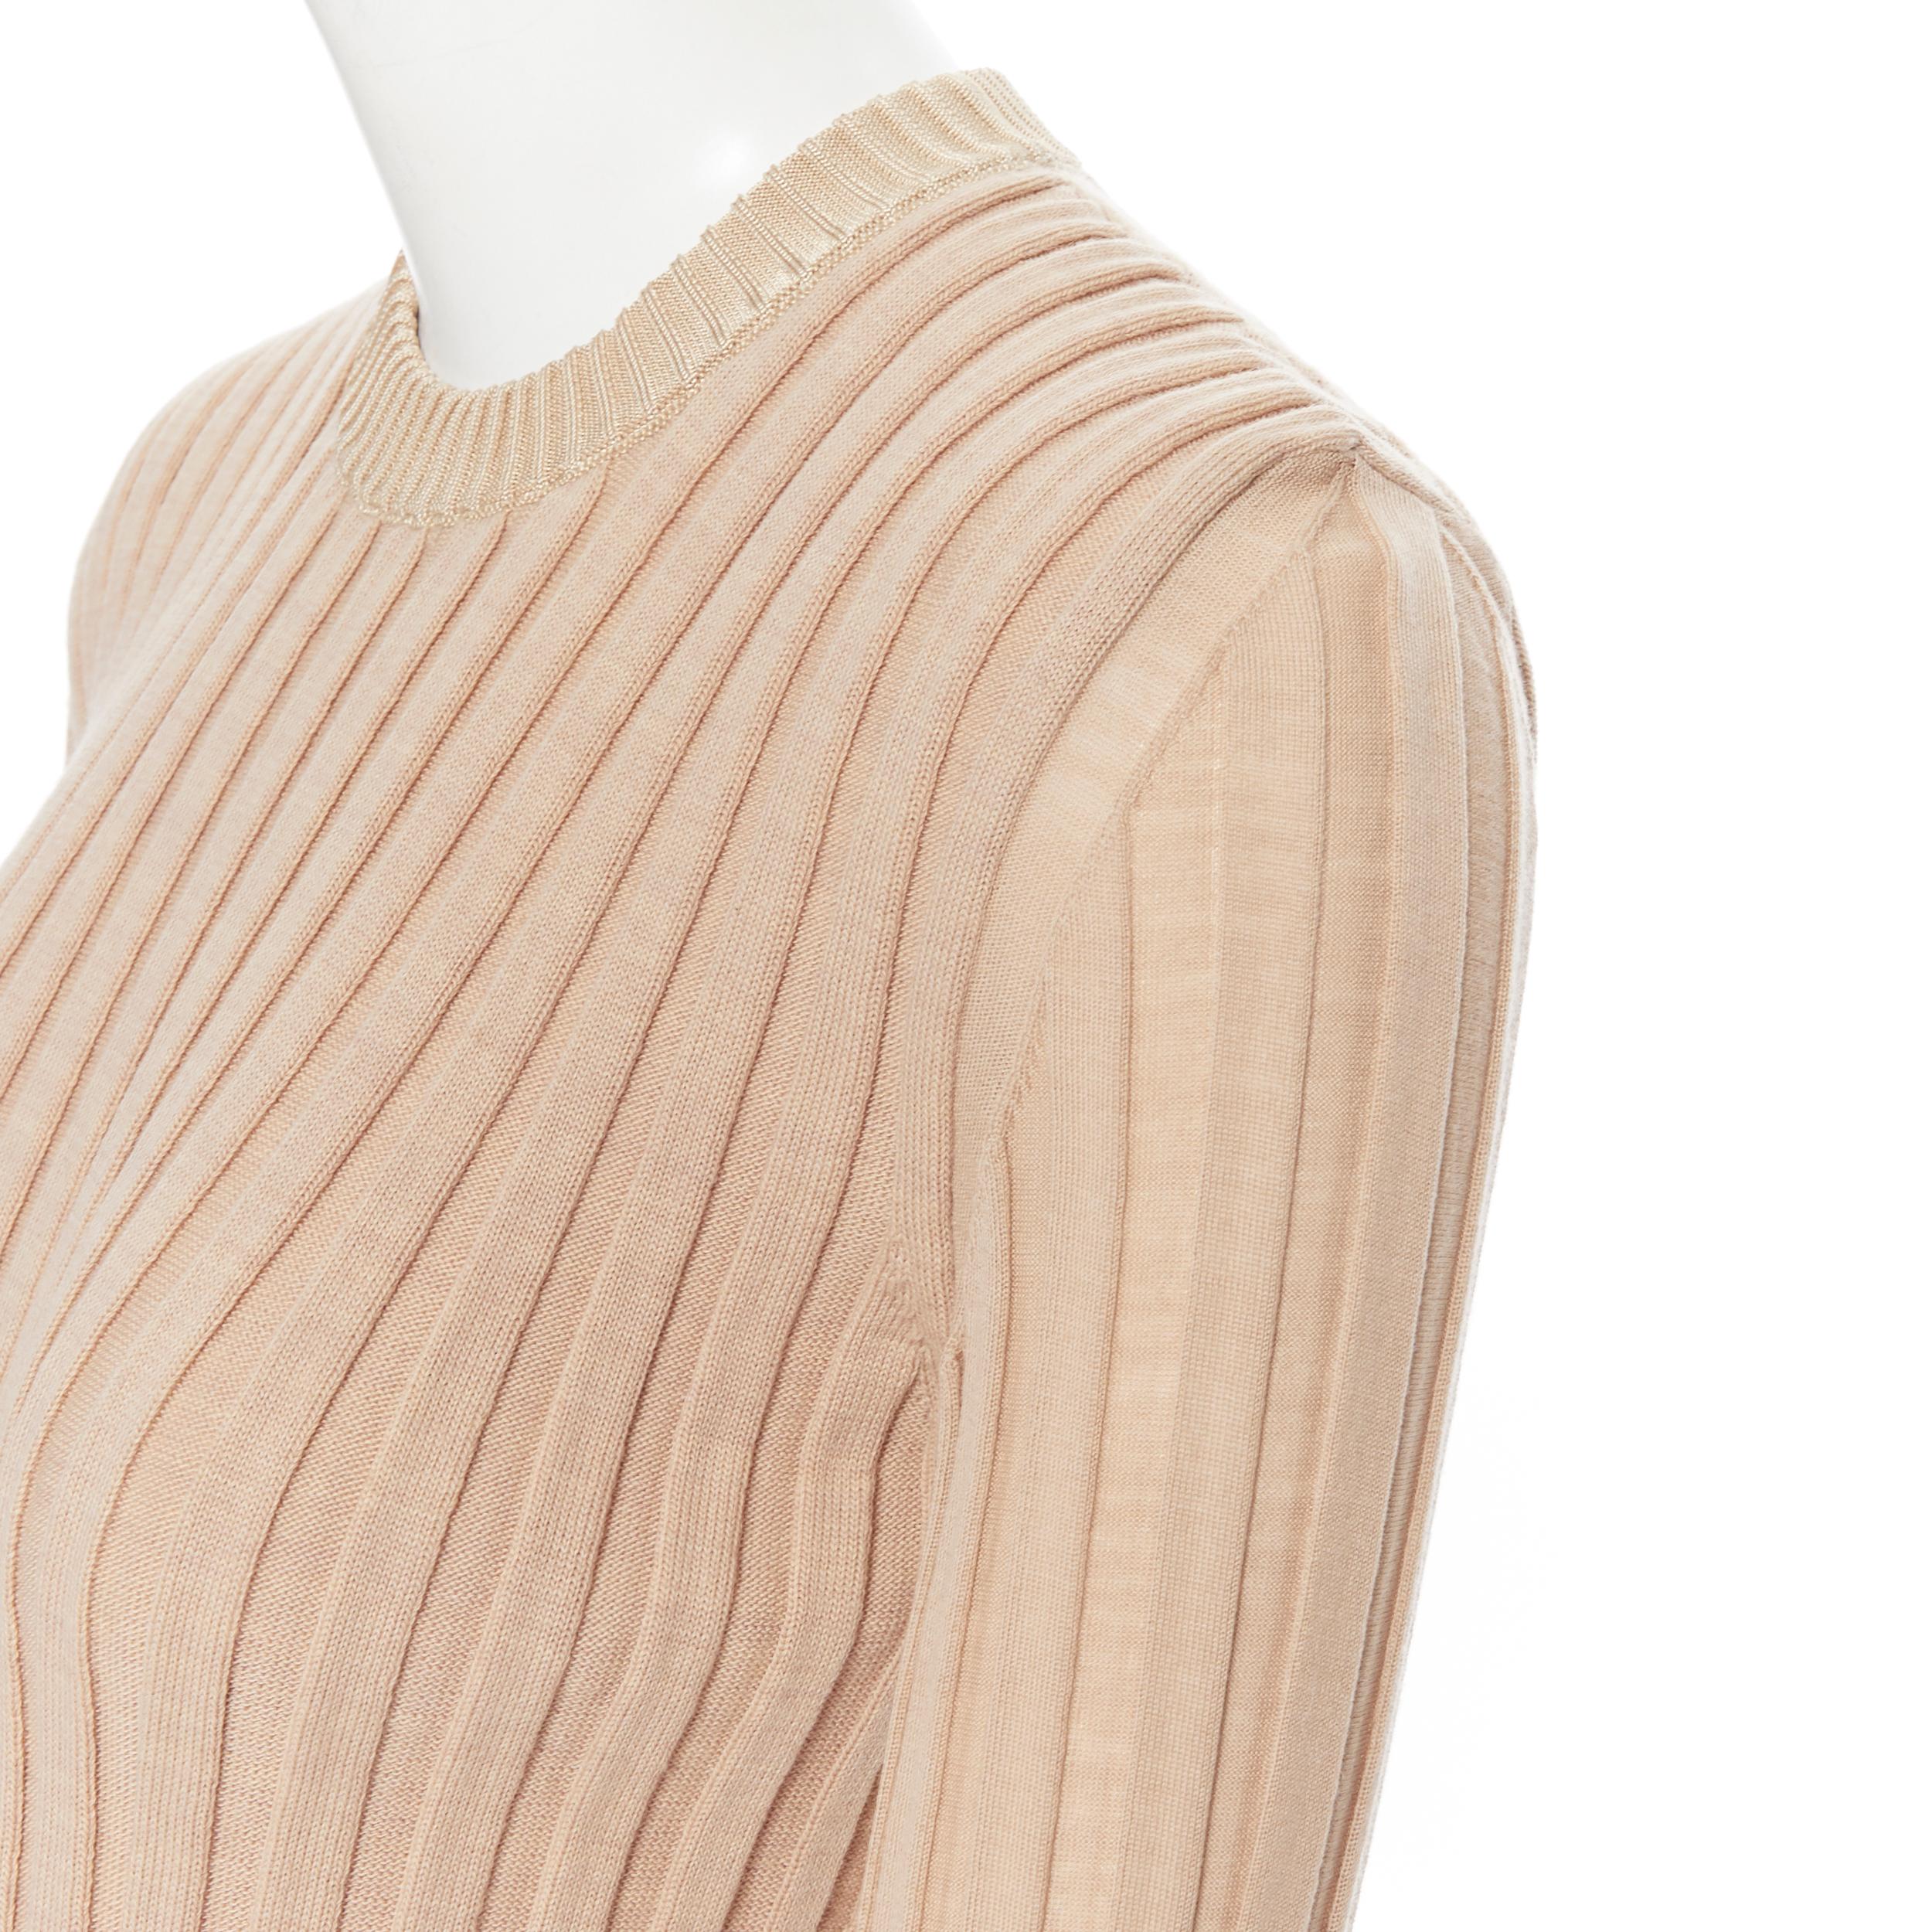 runway OLD CELINE Phoebe Philo beige ribbed knit flared bell cuff sweater top XS 1